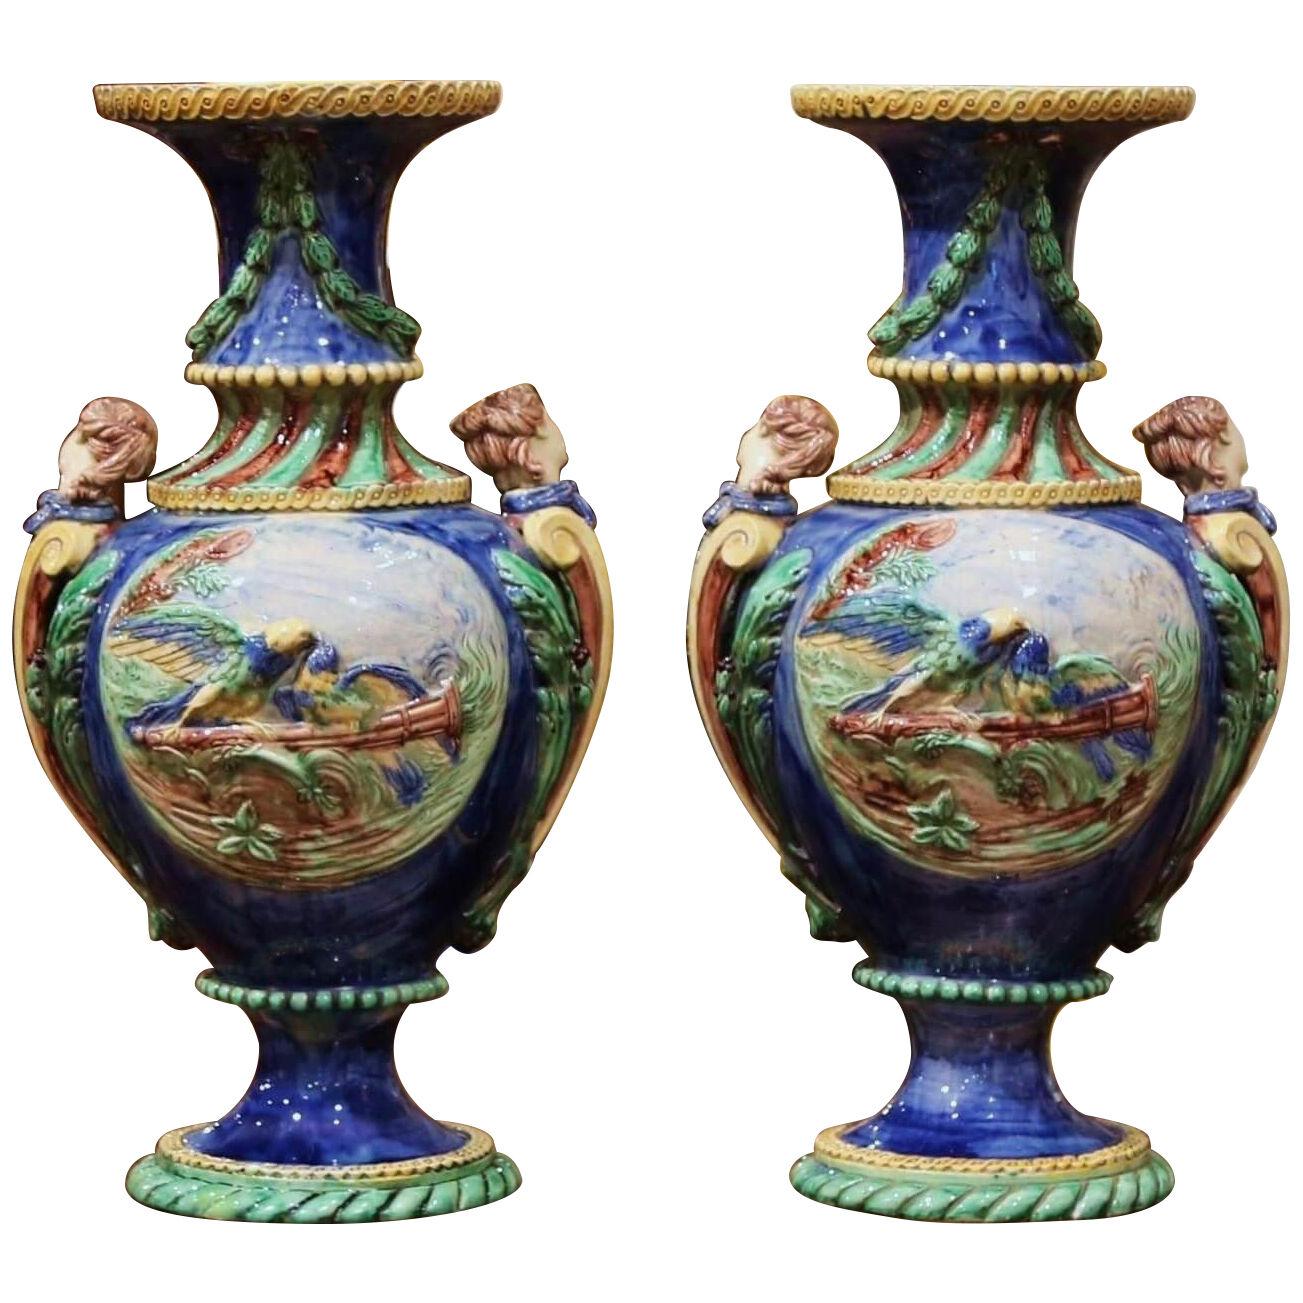 Pair of 19th Century French Painted Faience Barbotine Vases from Thomas Sergent